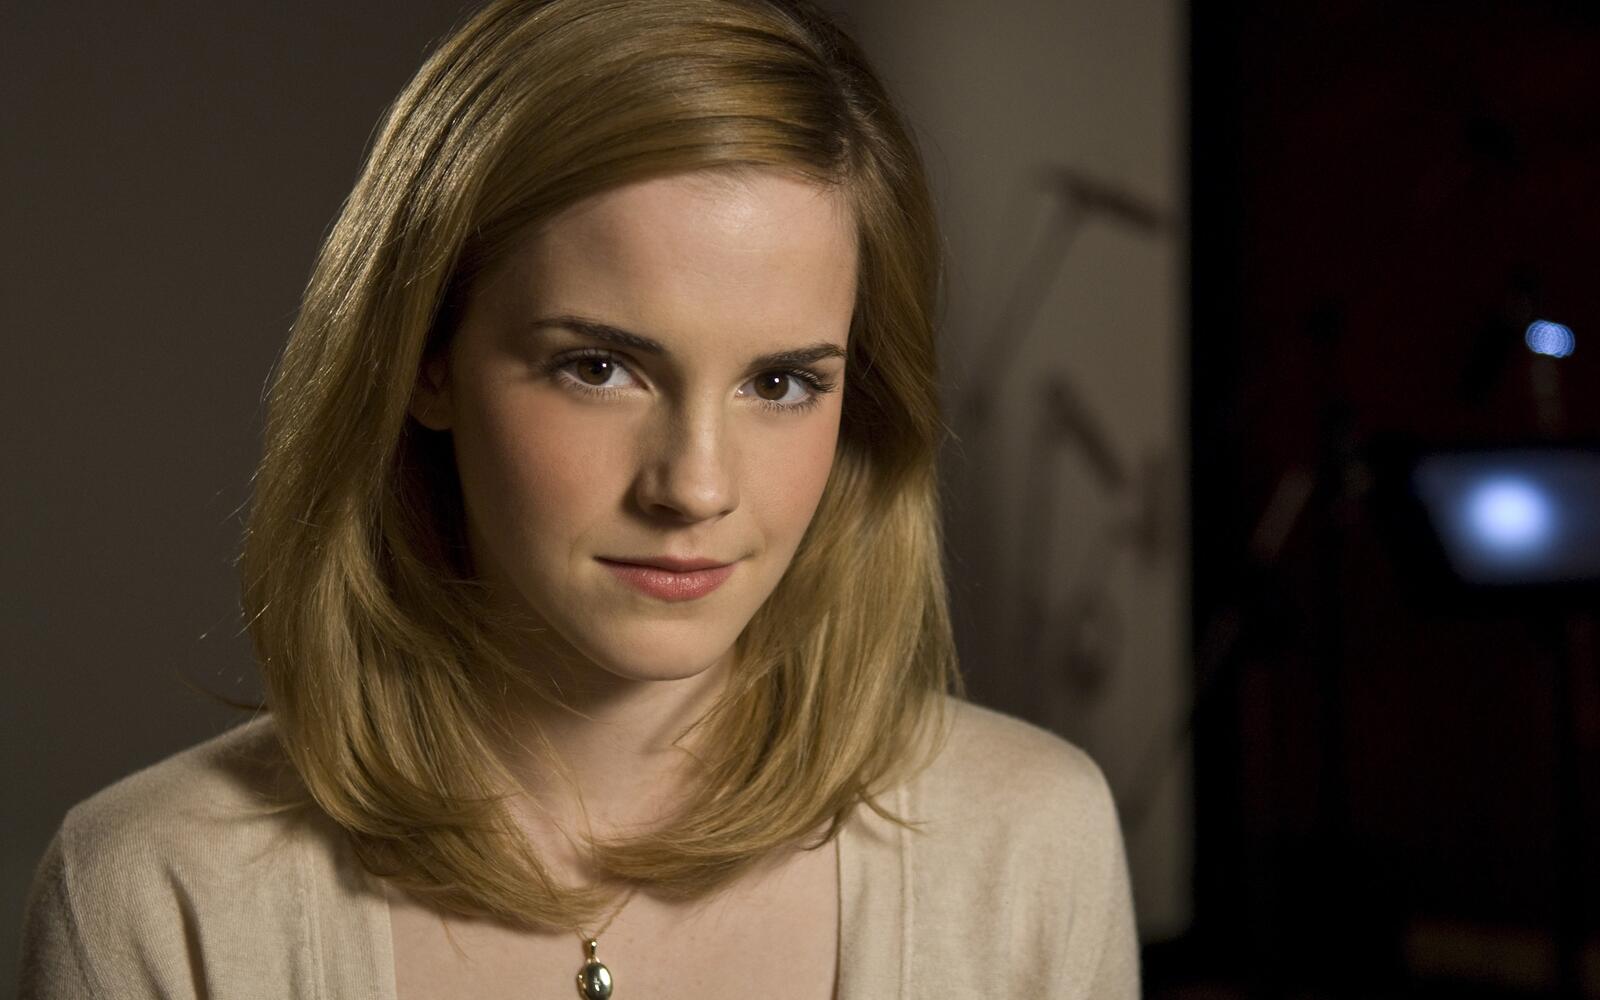 Wallpapers looking at viewer Emma Watson hairstyle on the desktop